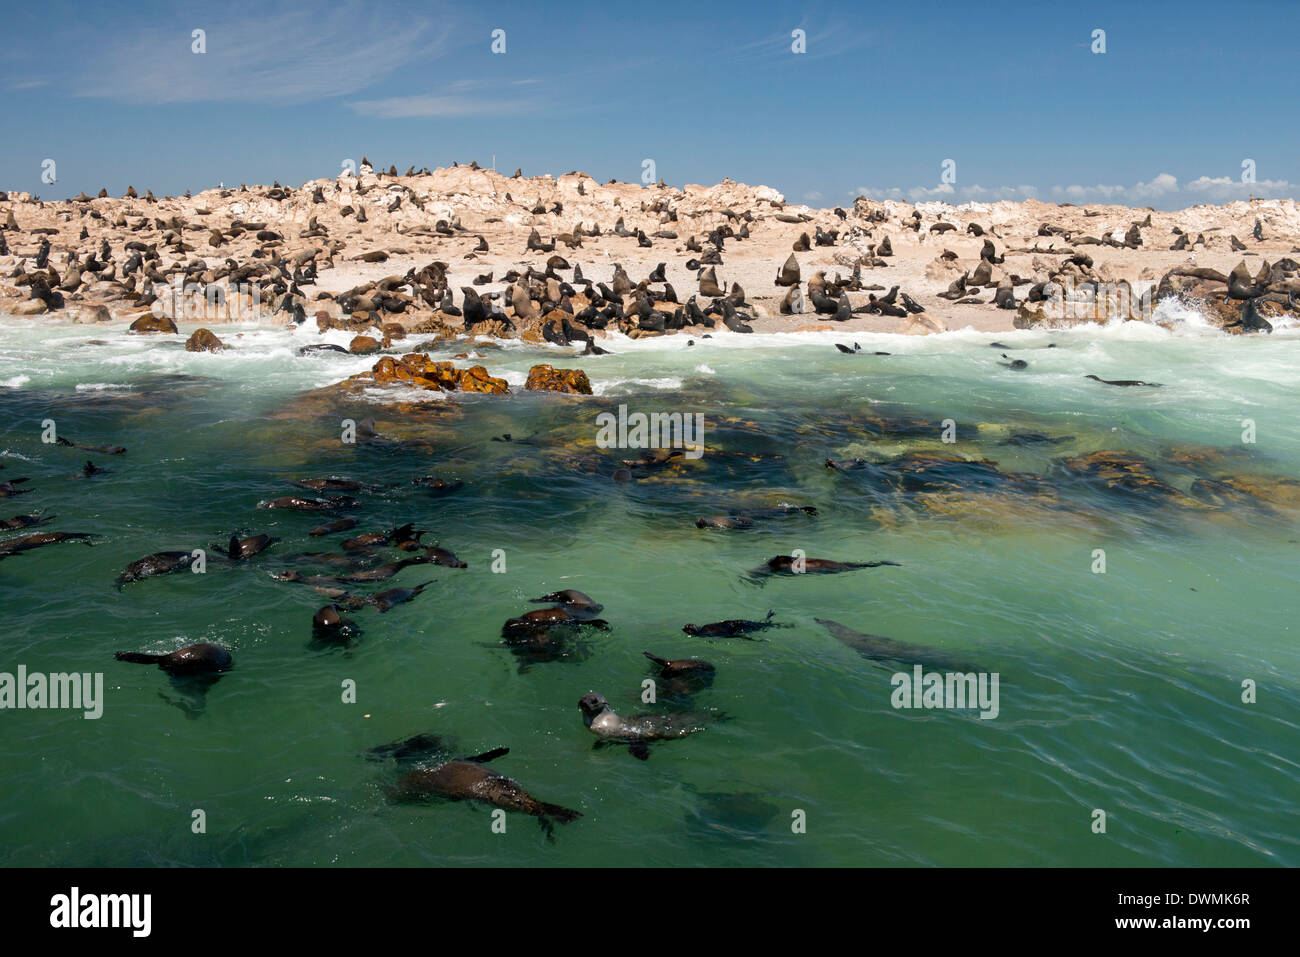 Cape fur seal colony (Arctocephalus pusillus) at Geyser Island, Dyer Island offshore from Klein baai, Western Cape, South Africa Stock Photo